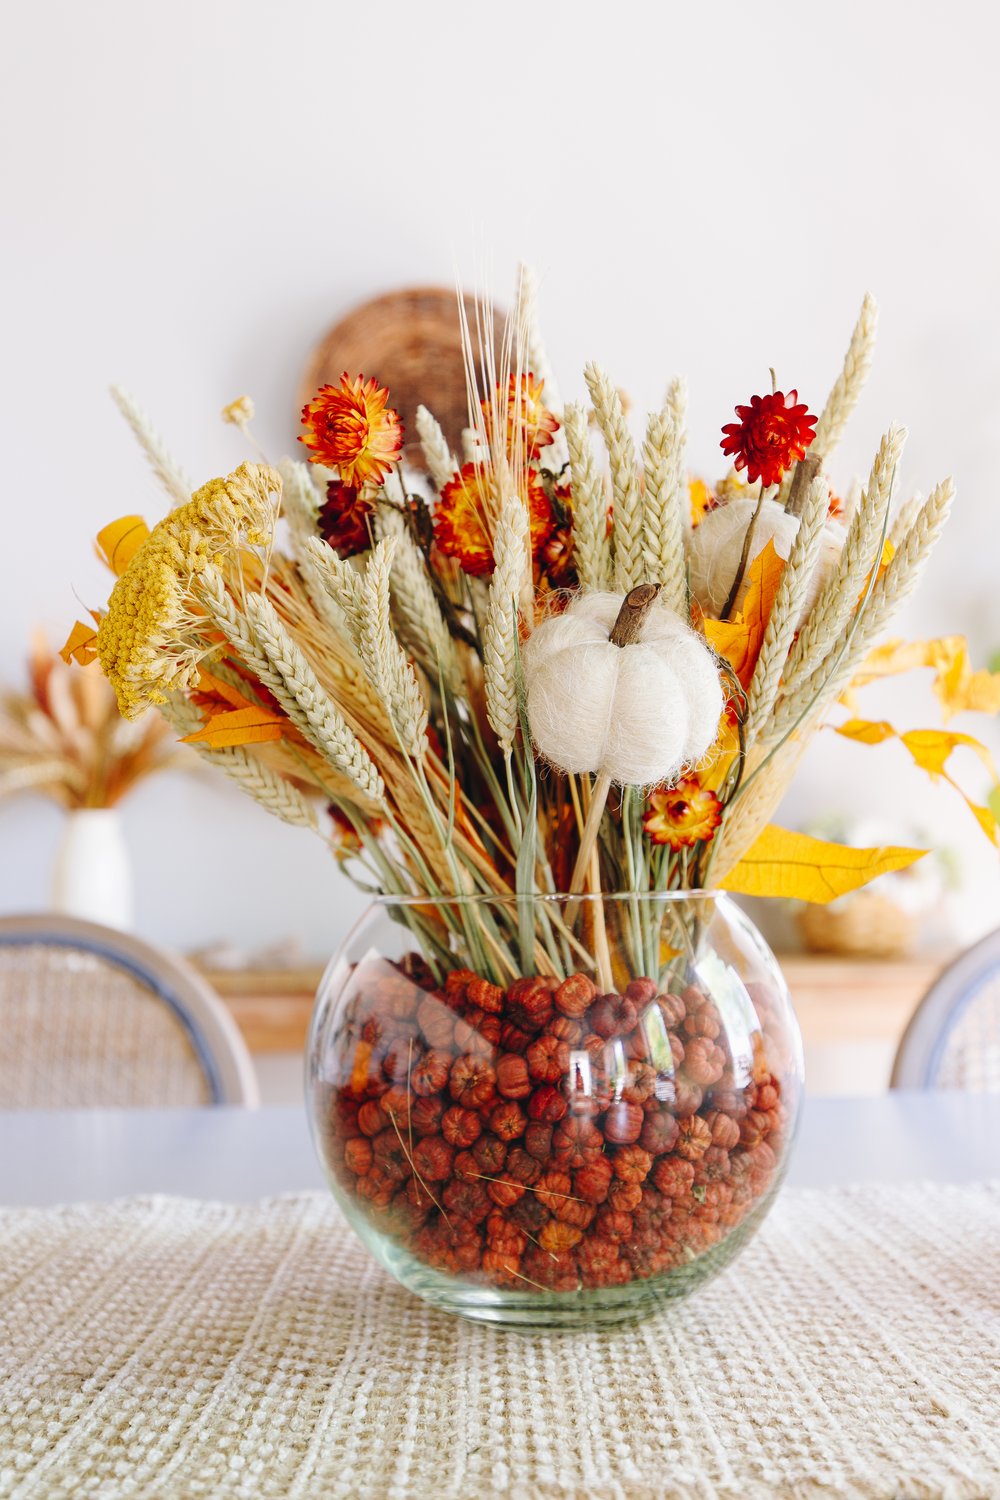 7 Easy Dried Natural Flower Home Arrangements to Make This Fall